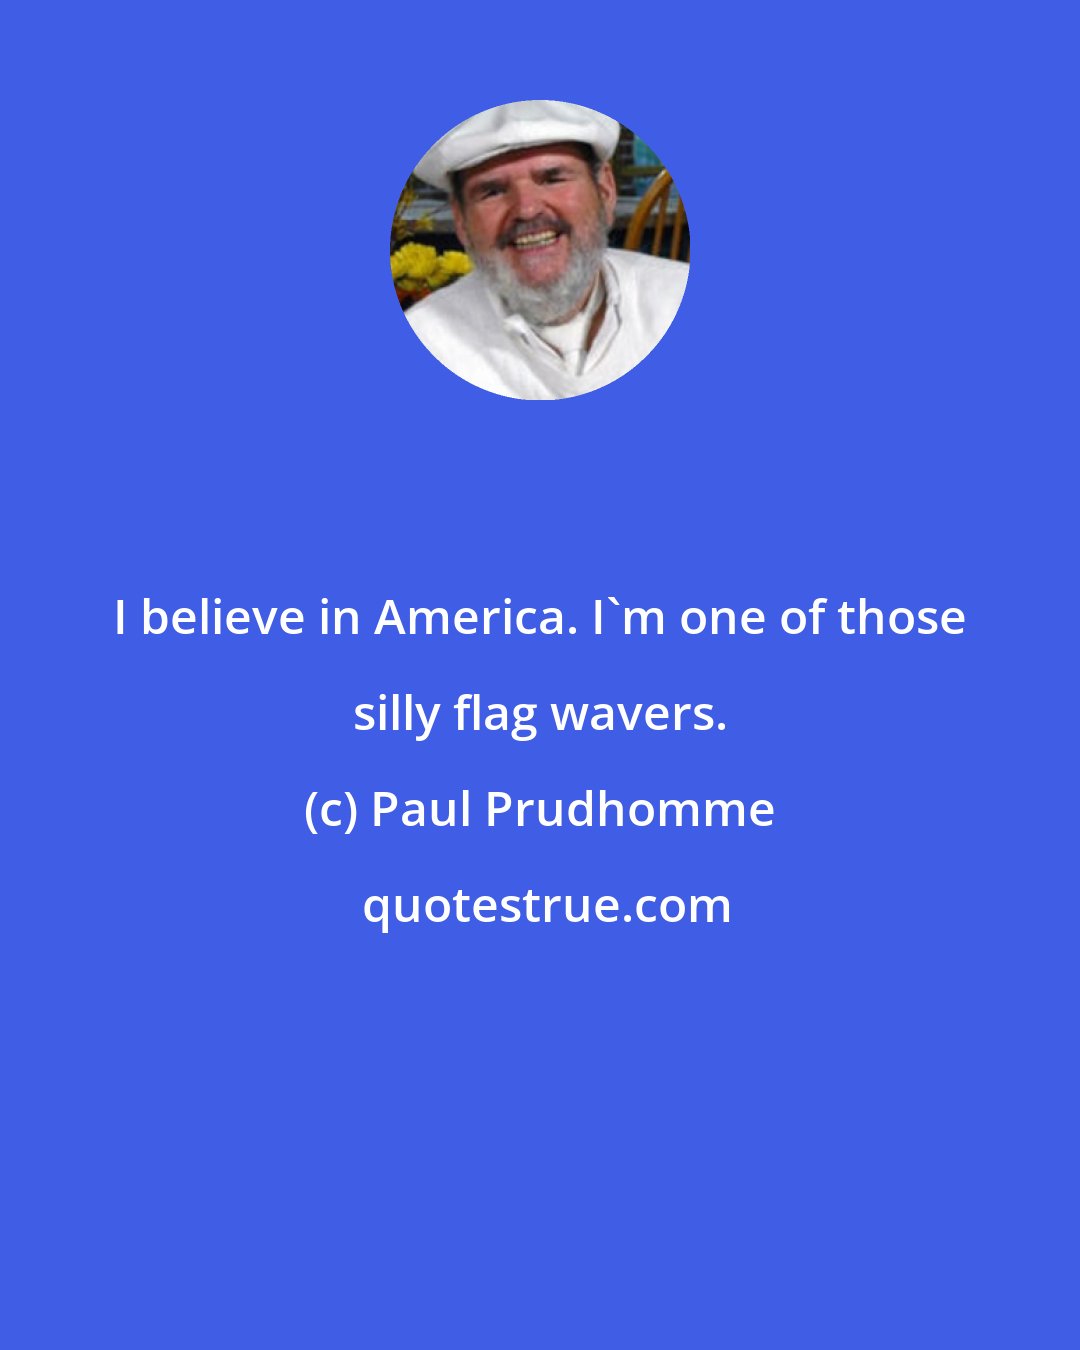 Paul Prudhomme: I believe in America. I'm one of those silly flag wavers.